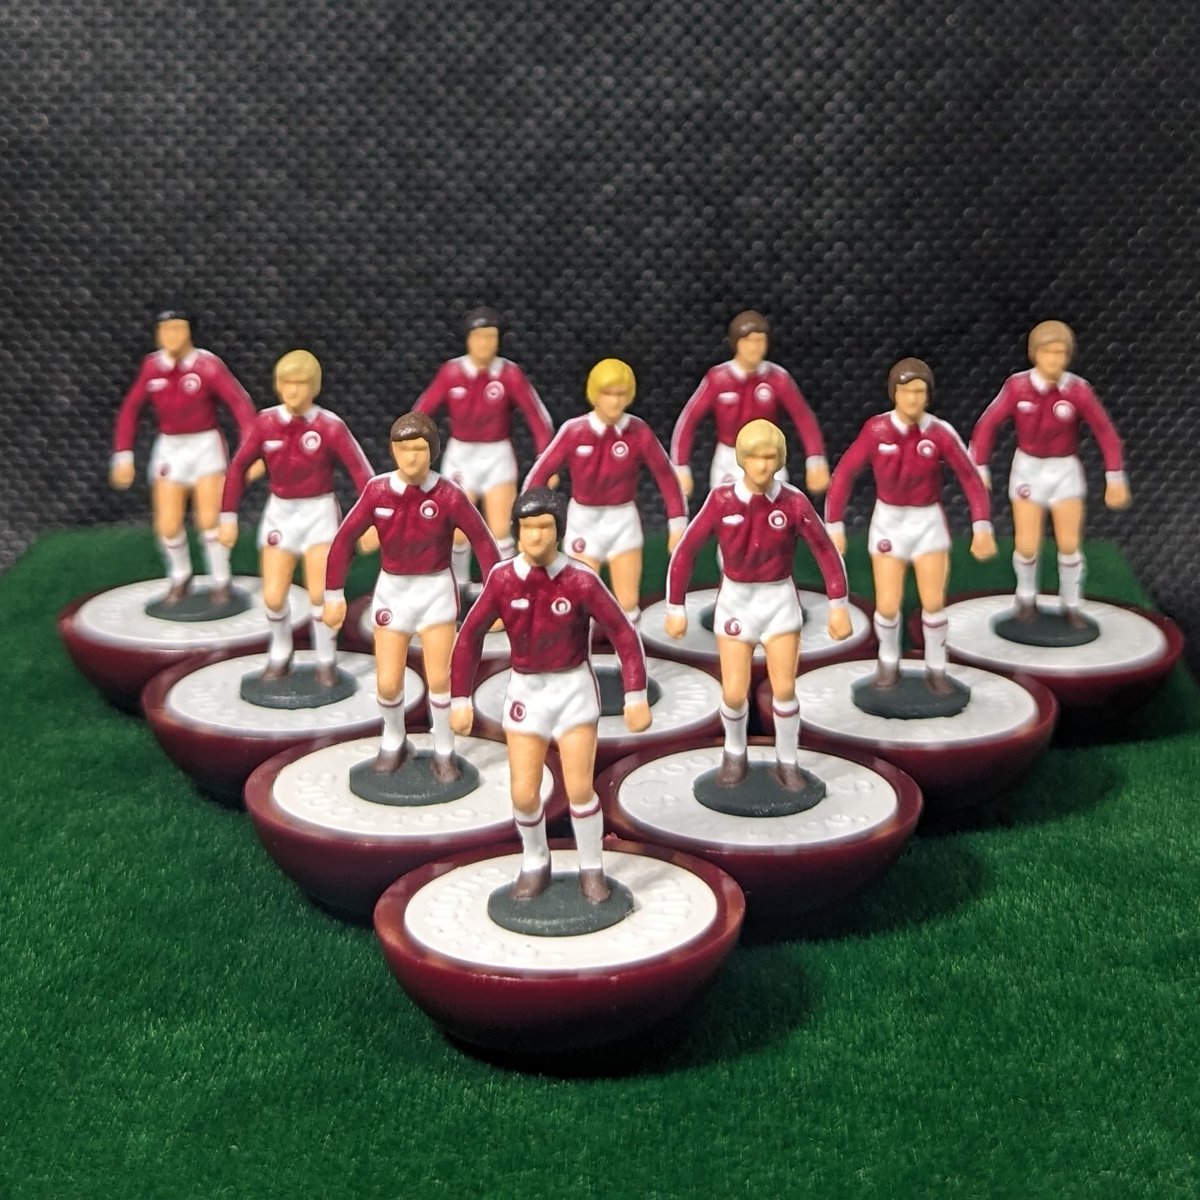 #subbuteo showcase 📸 of the day, #TheMaroonMachine, @KeltyHeartsFC 🇱🇻 love painting a bit of maroon! drop me a like/repost to get my #art out there 👀🎨🖌️ #tablefootball #soccer #football #vintage #retro #hobby #photooftheday #boardgames #nostalgia